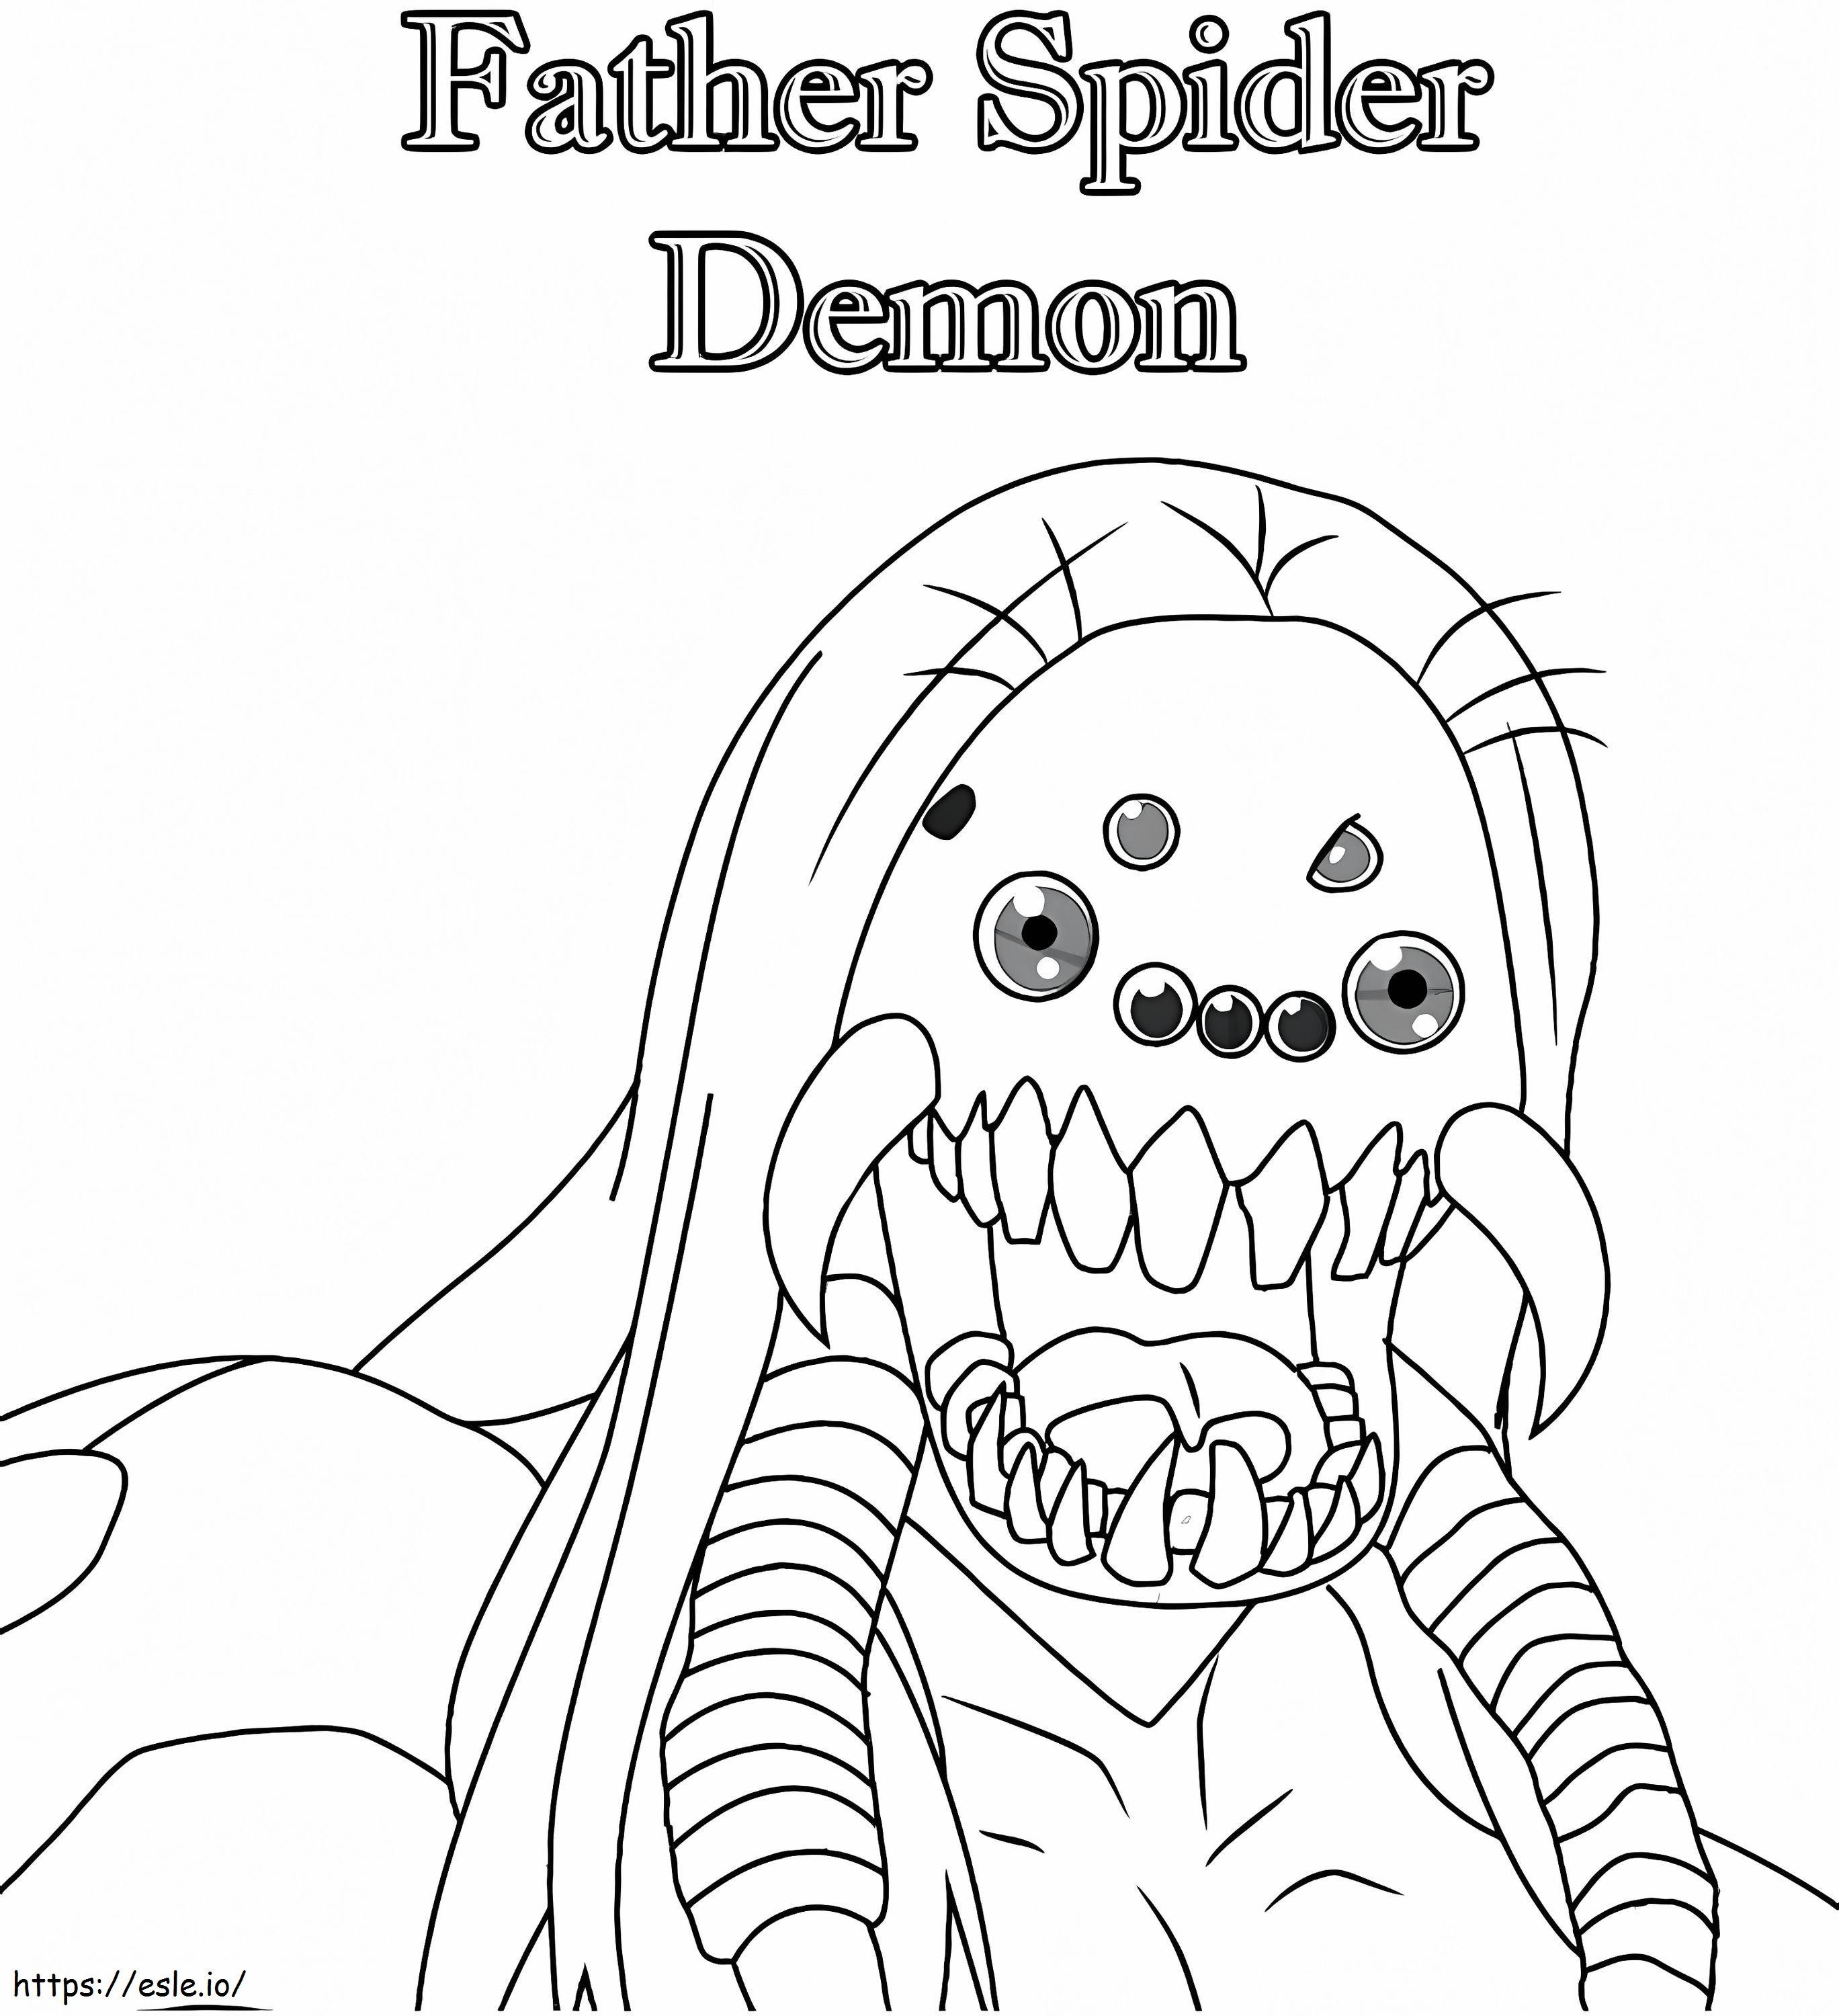 Father Spider Demon coloring page